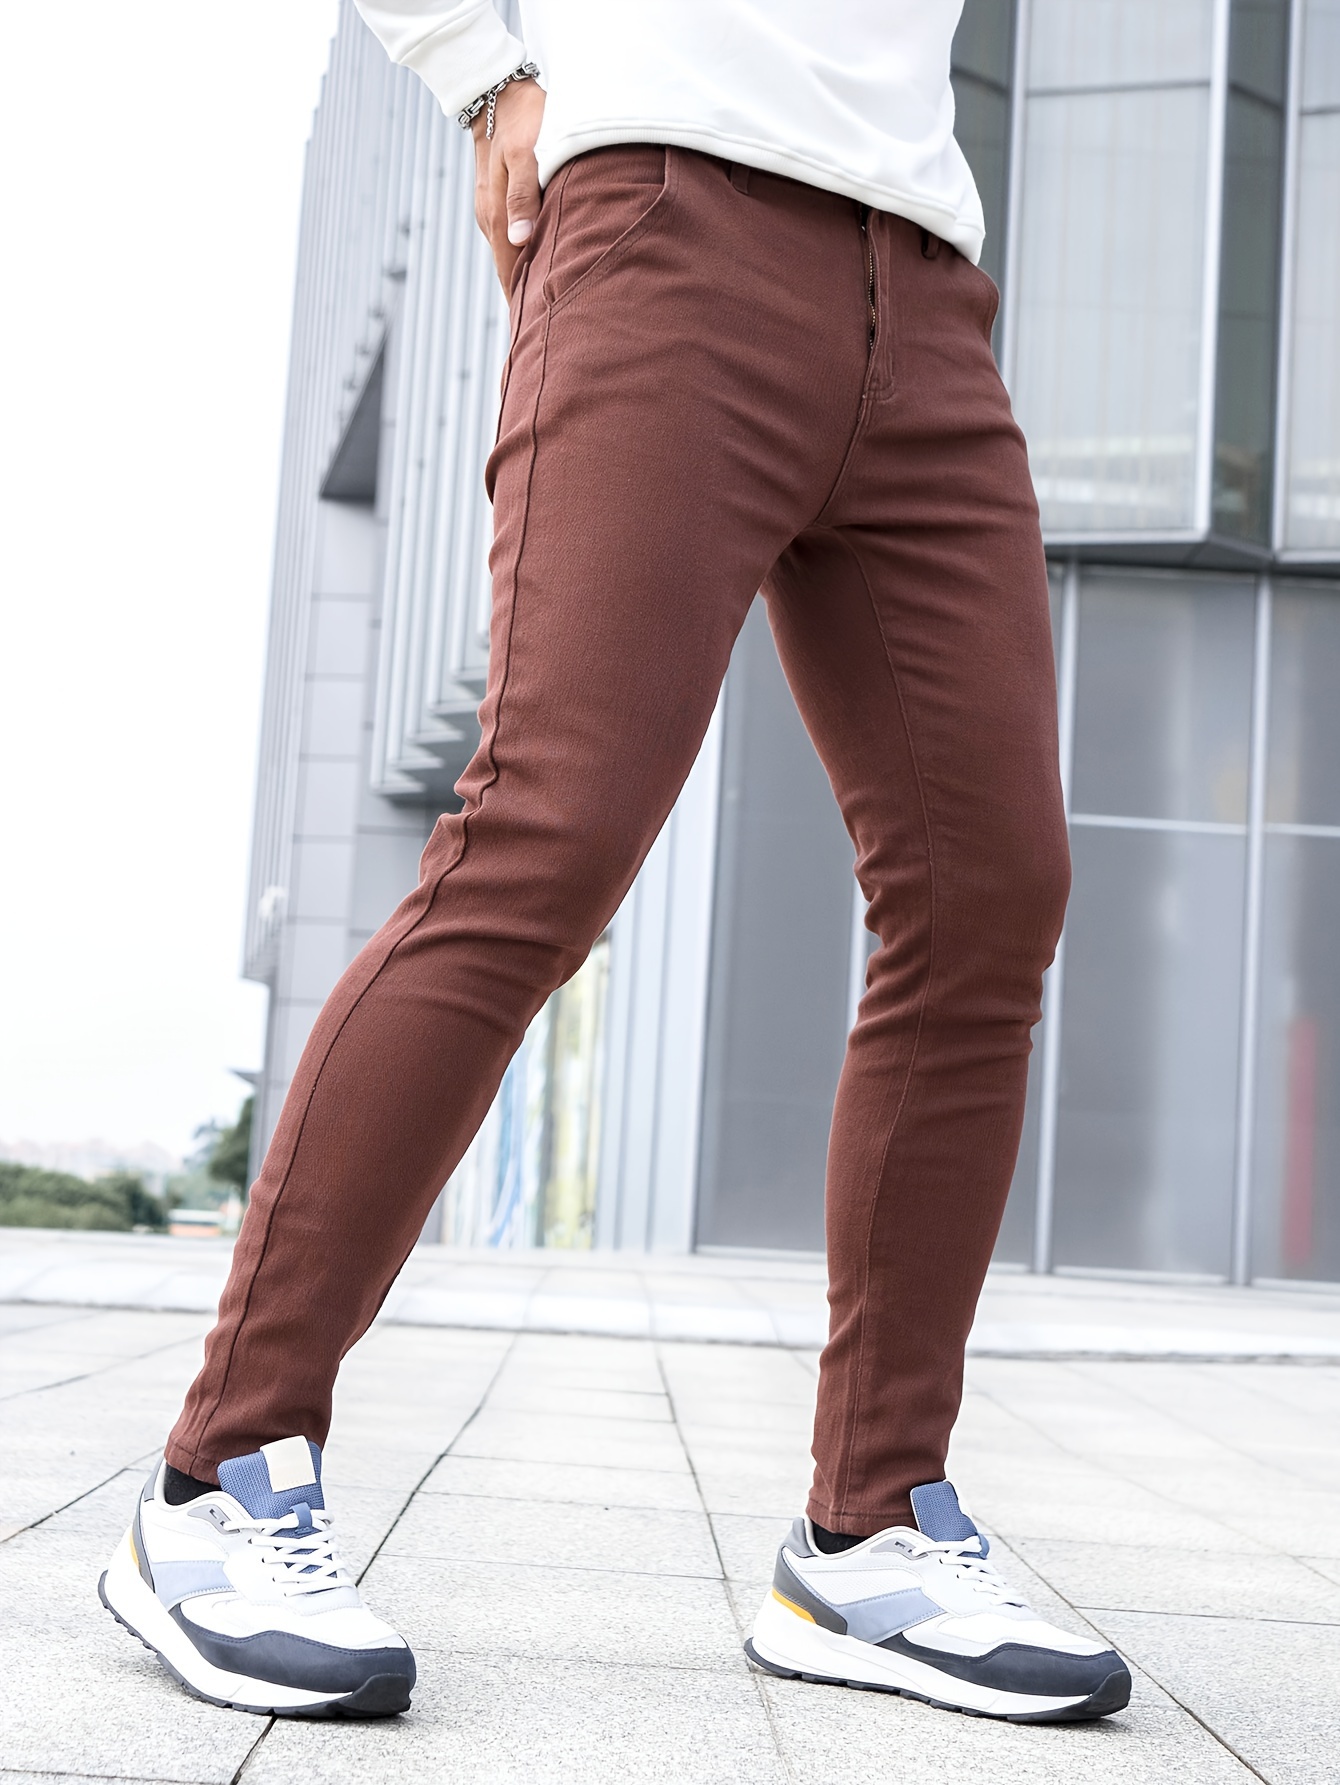 Buy High Stretch Men's Classic Pants Thin Trousers Casual High